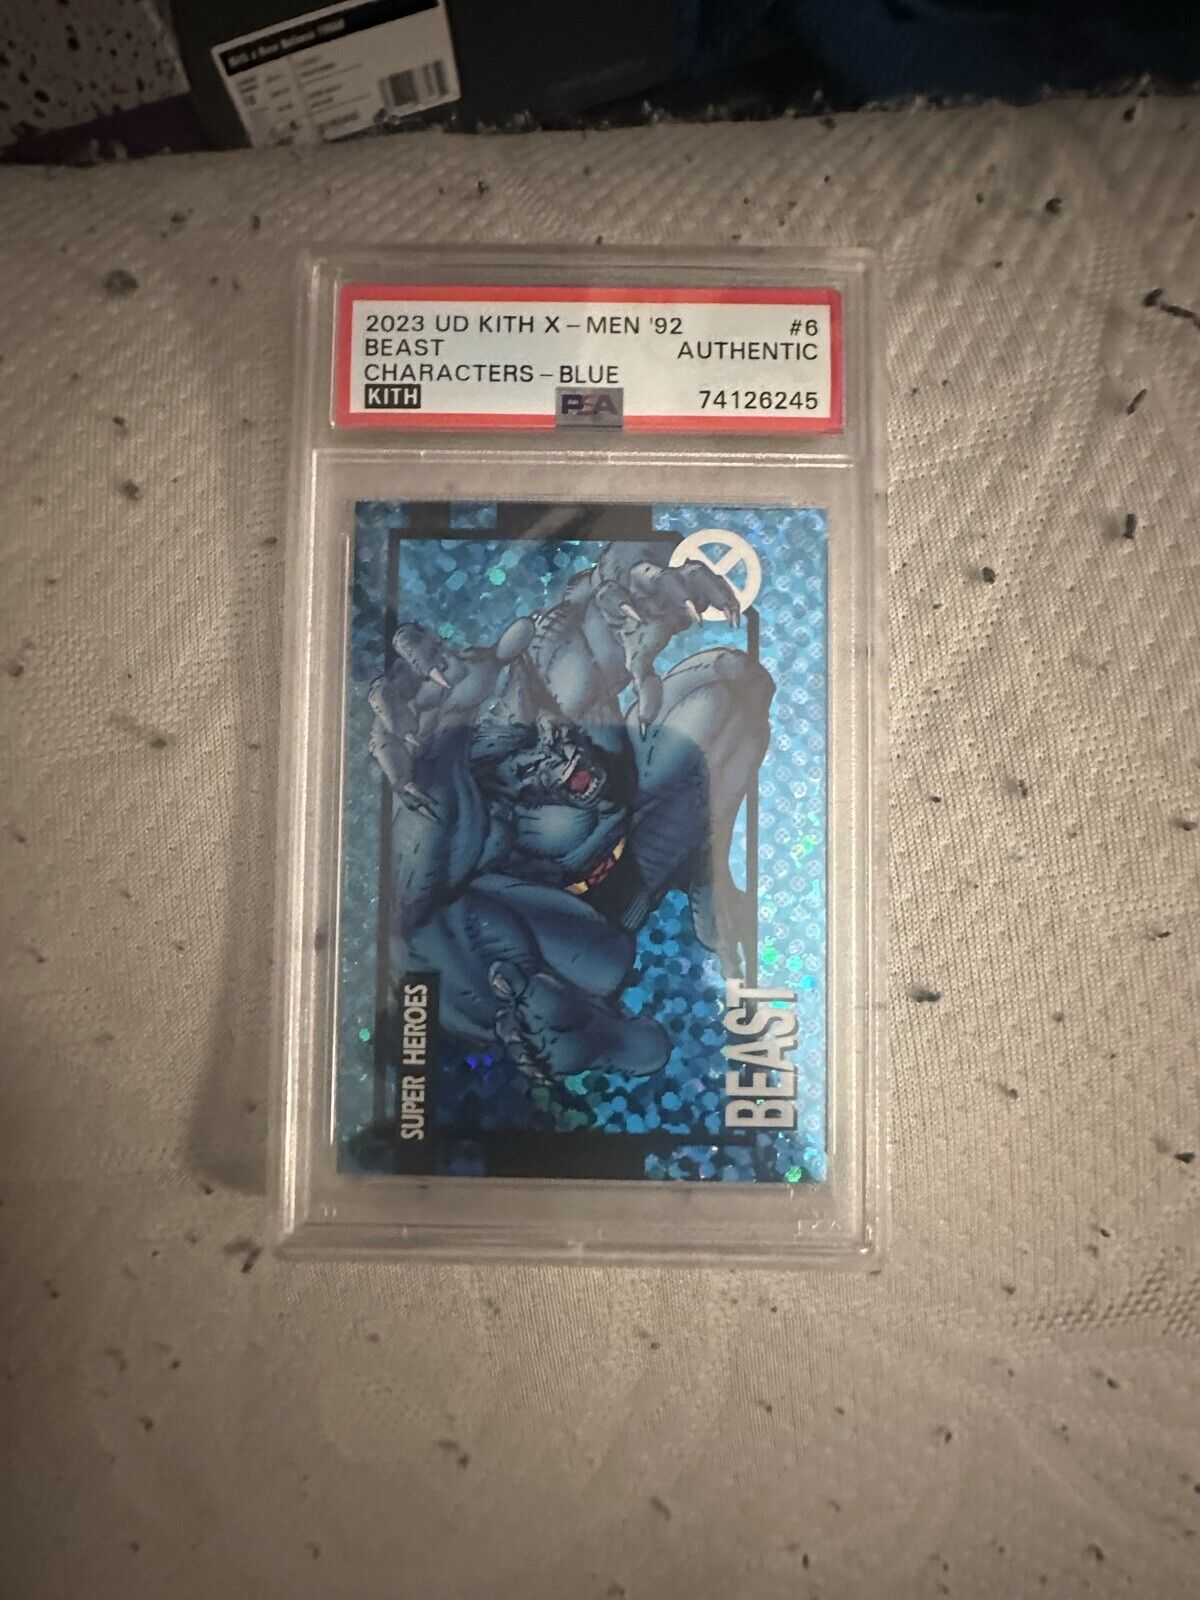 KITH MARVEL X-MEN 1992 BEAST BLUE AUTHENTIC- PSA CARD  1/50 1 Out Of 50